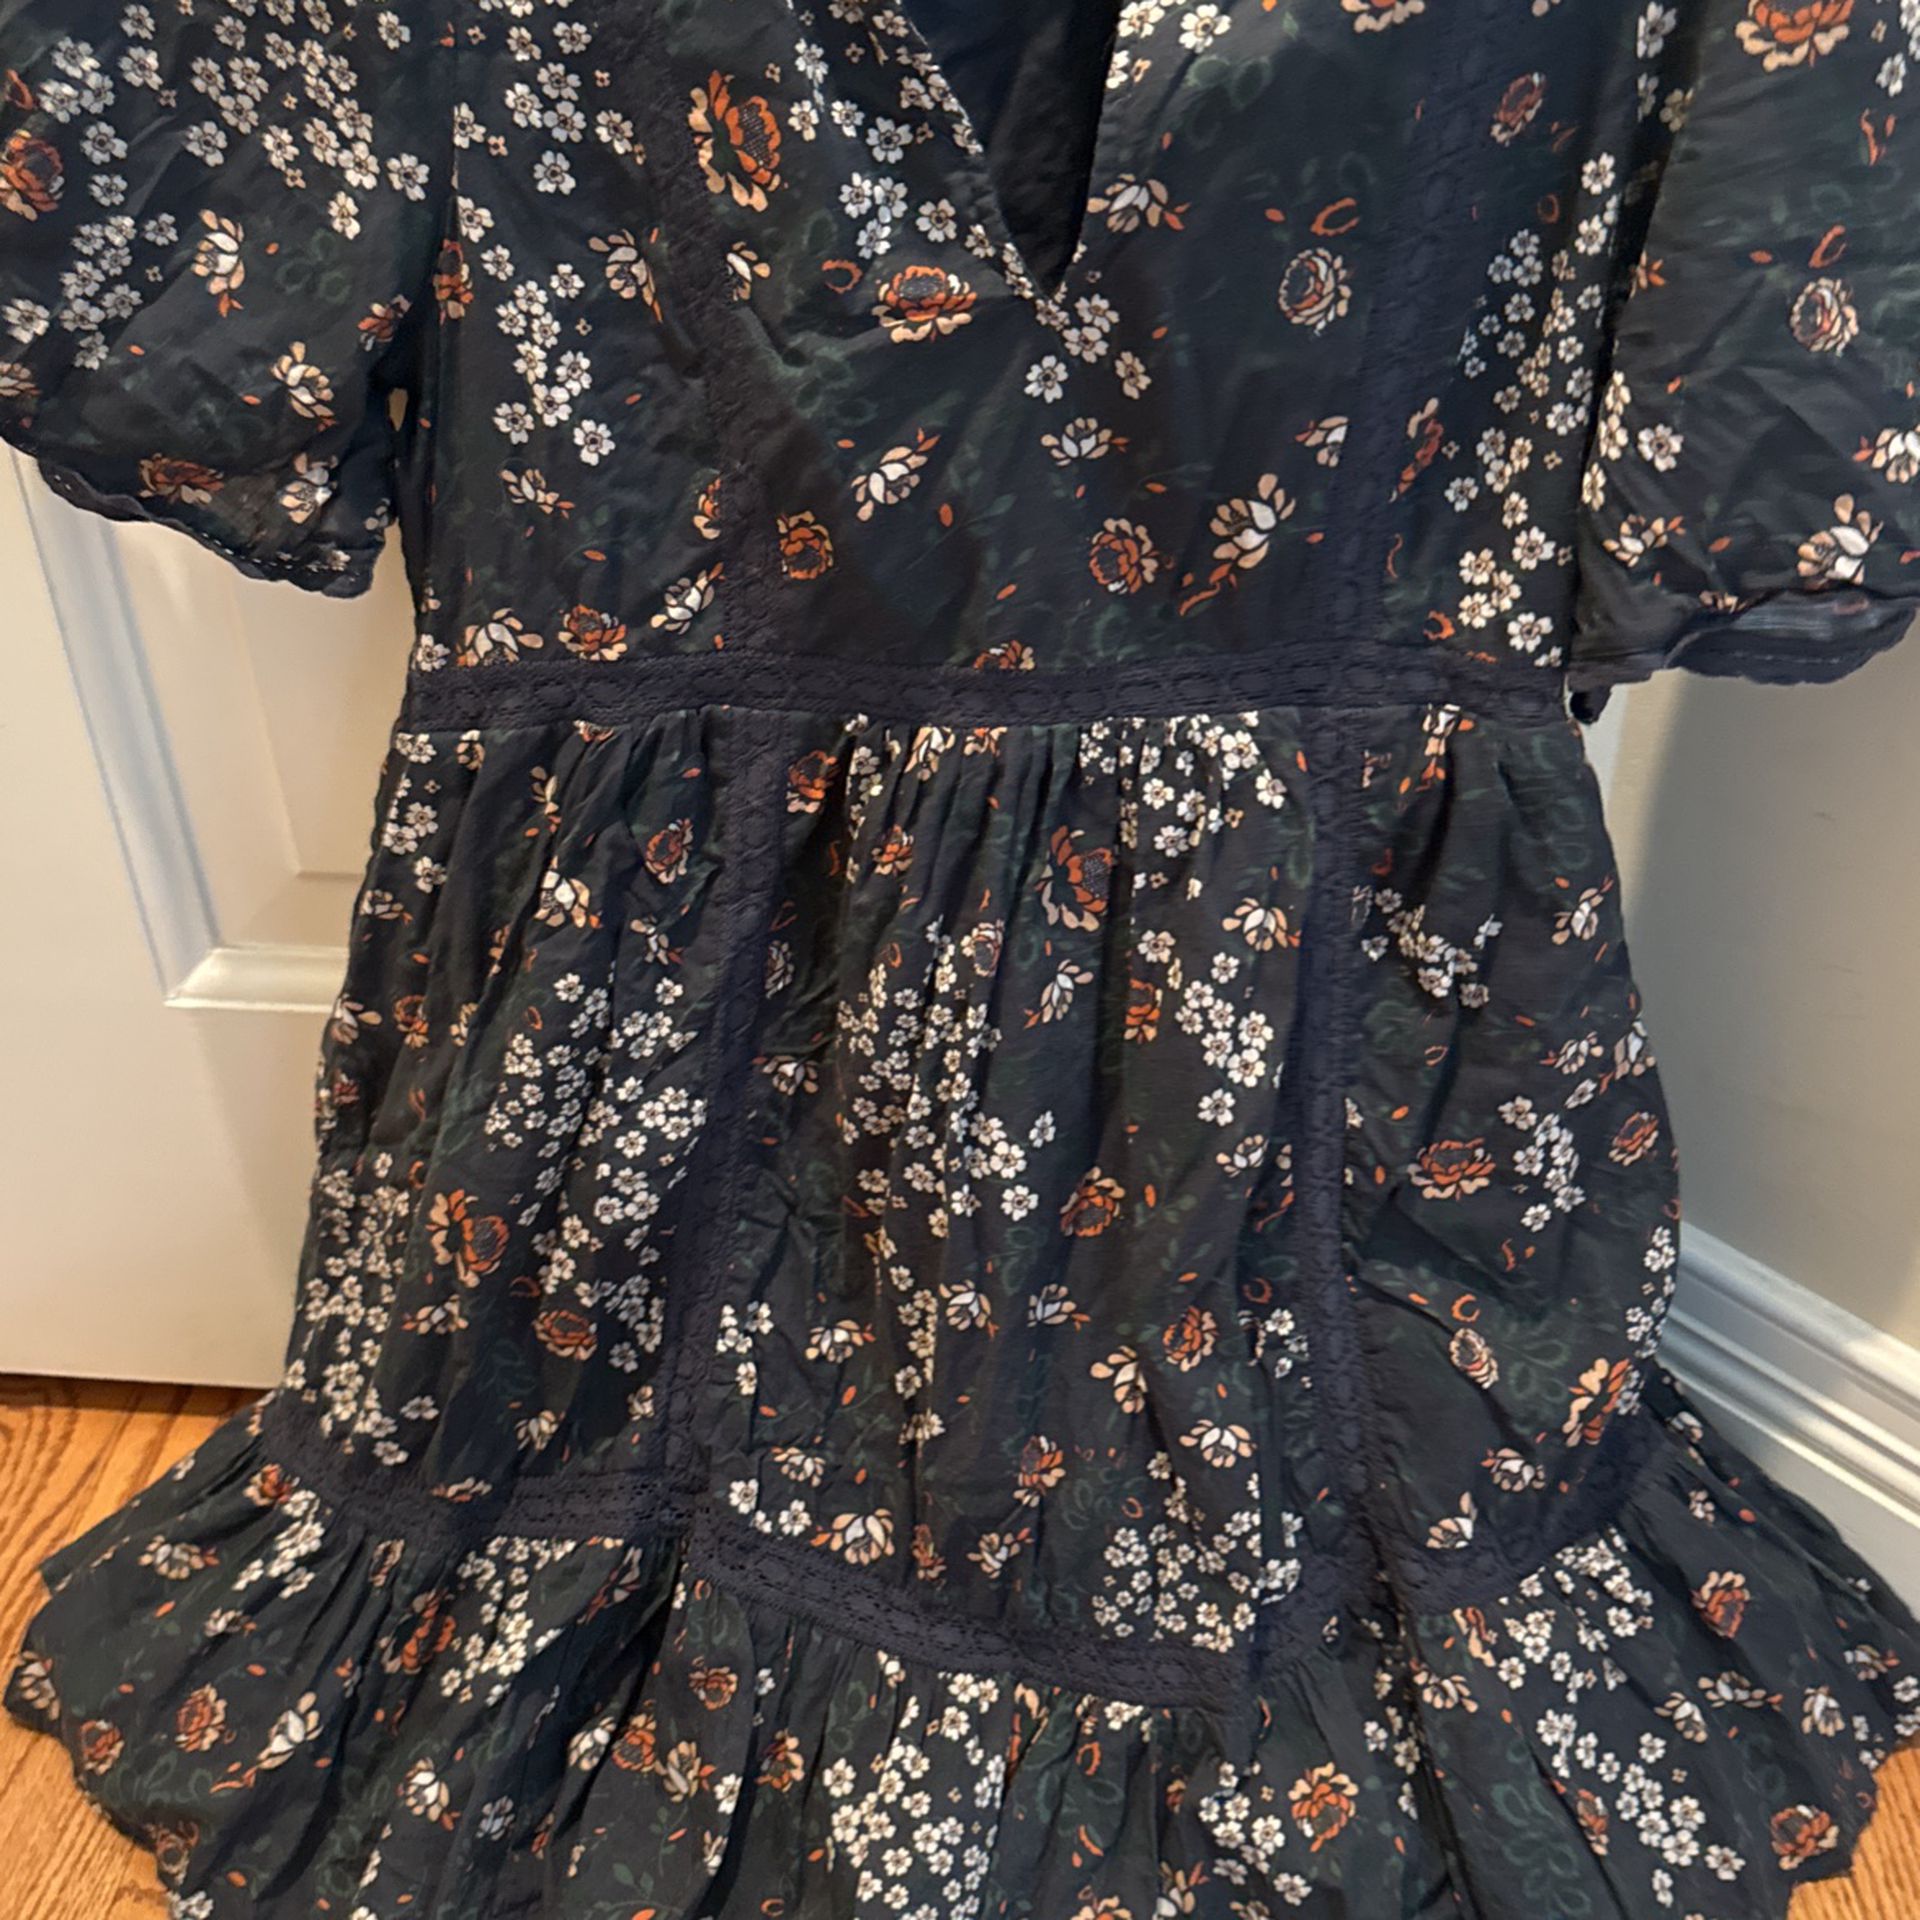 Anthropologie Navy Floral Dress- Small